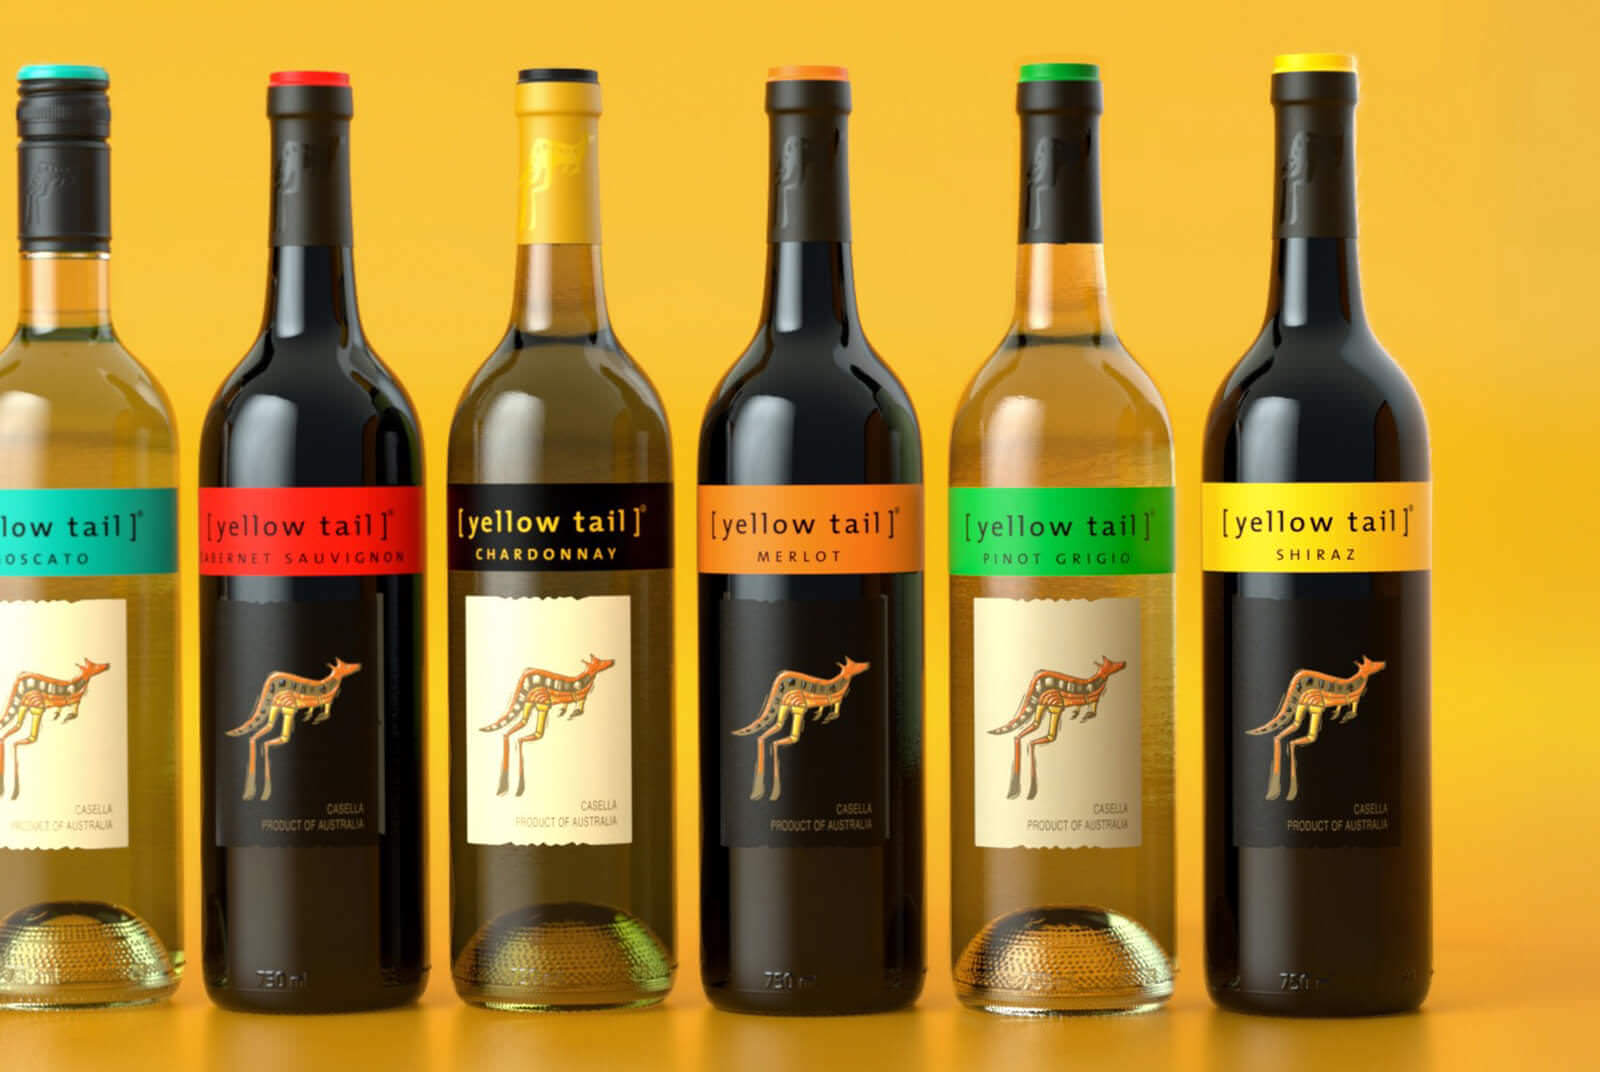 Image of yellow tail wine packaging